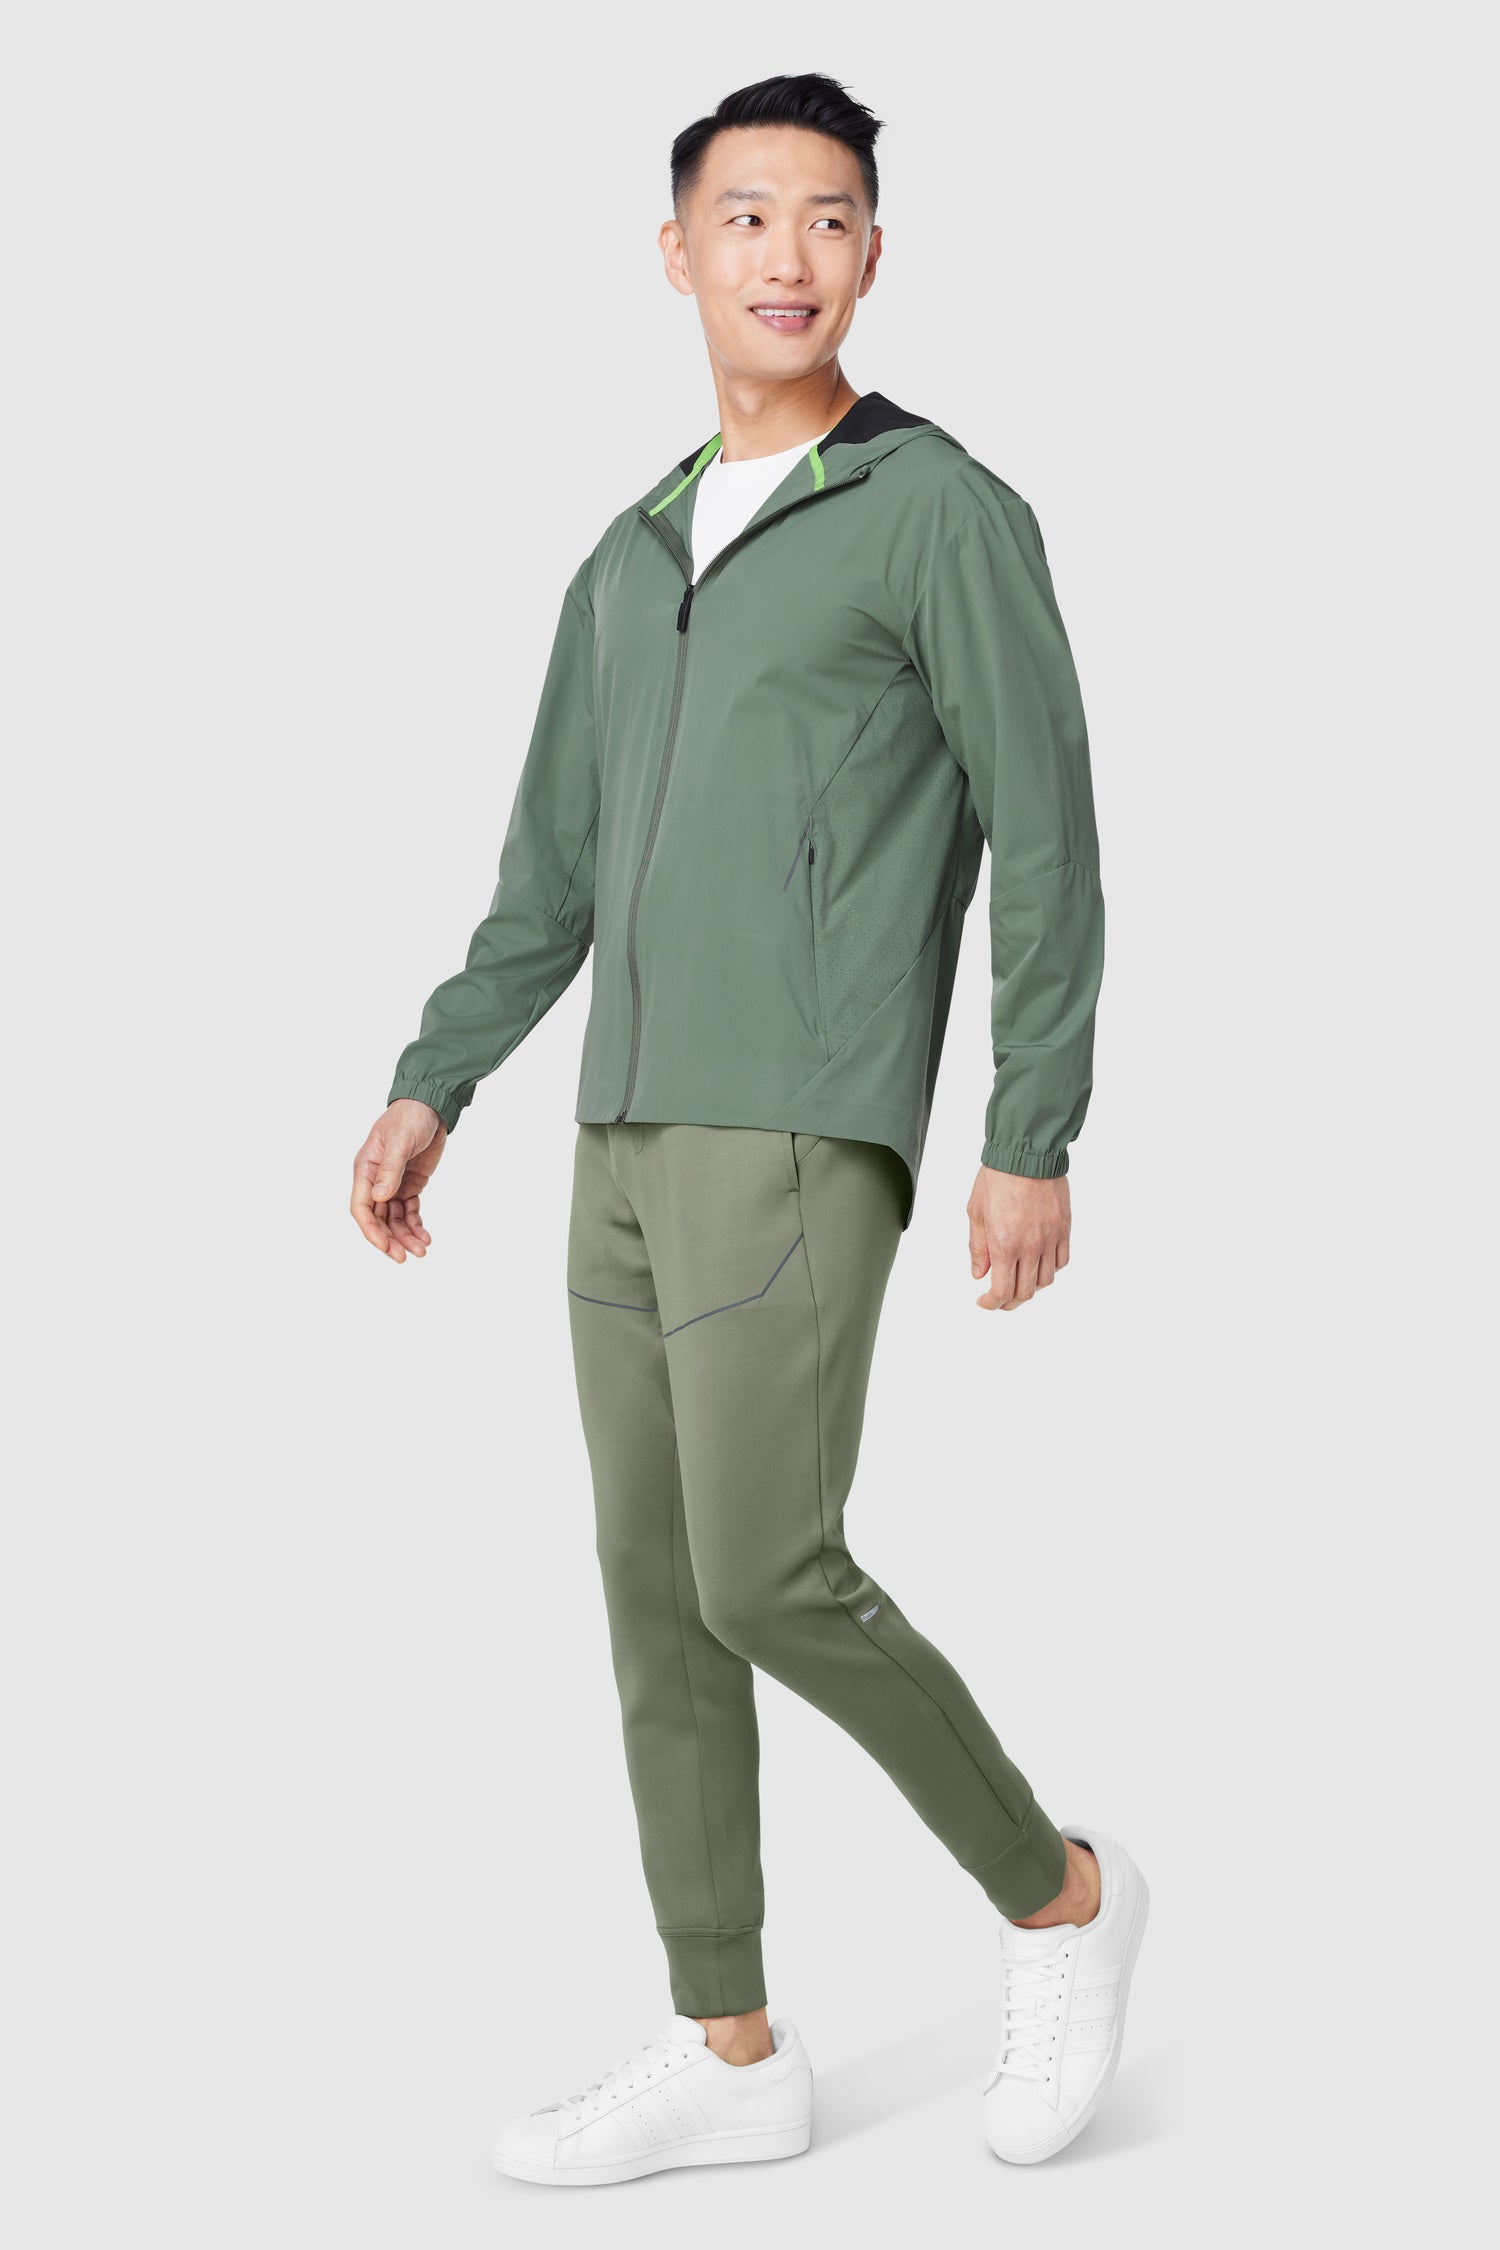 Push FWD Men's Aviate Stretch Packable Jacket - BEST SELLING